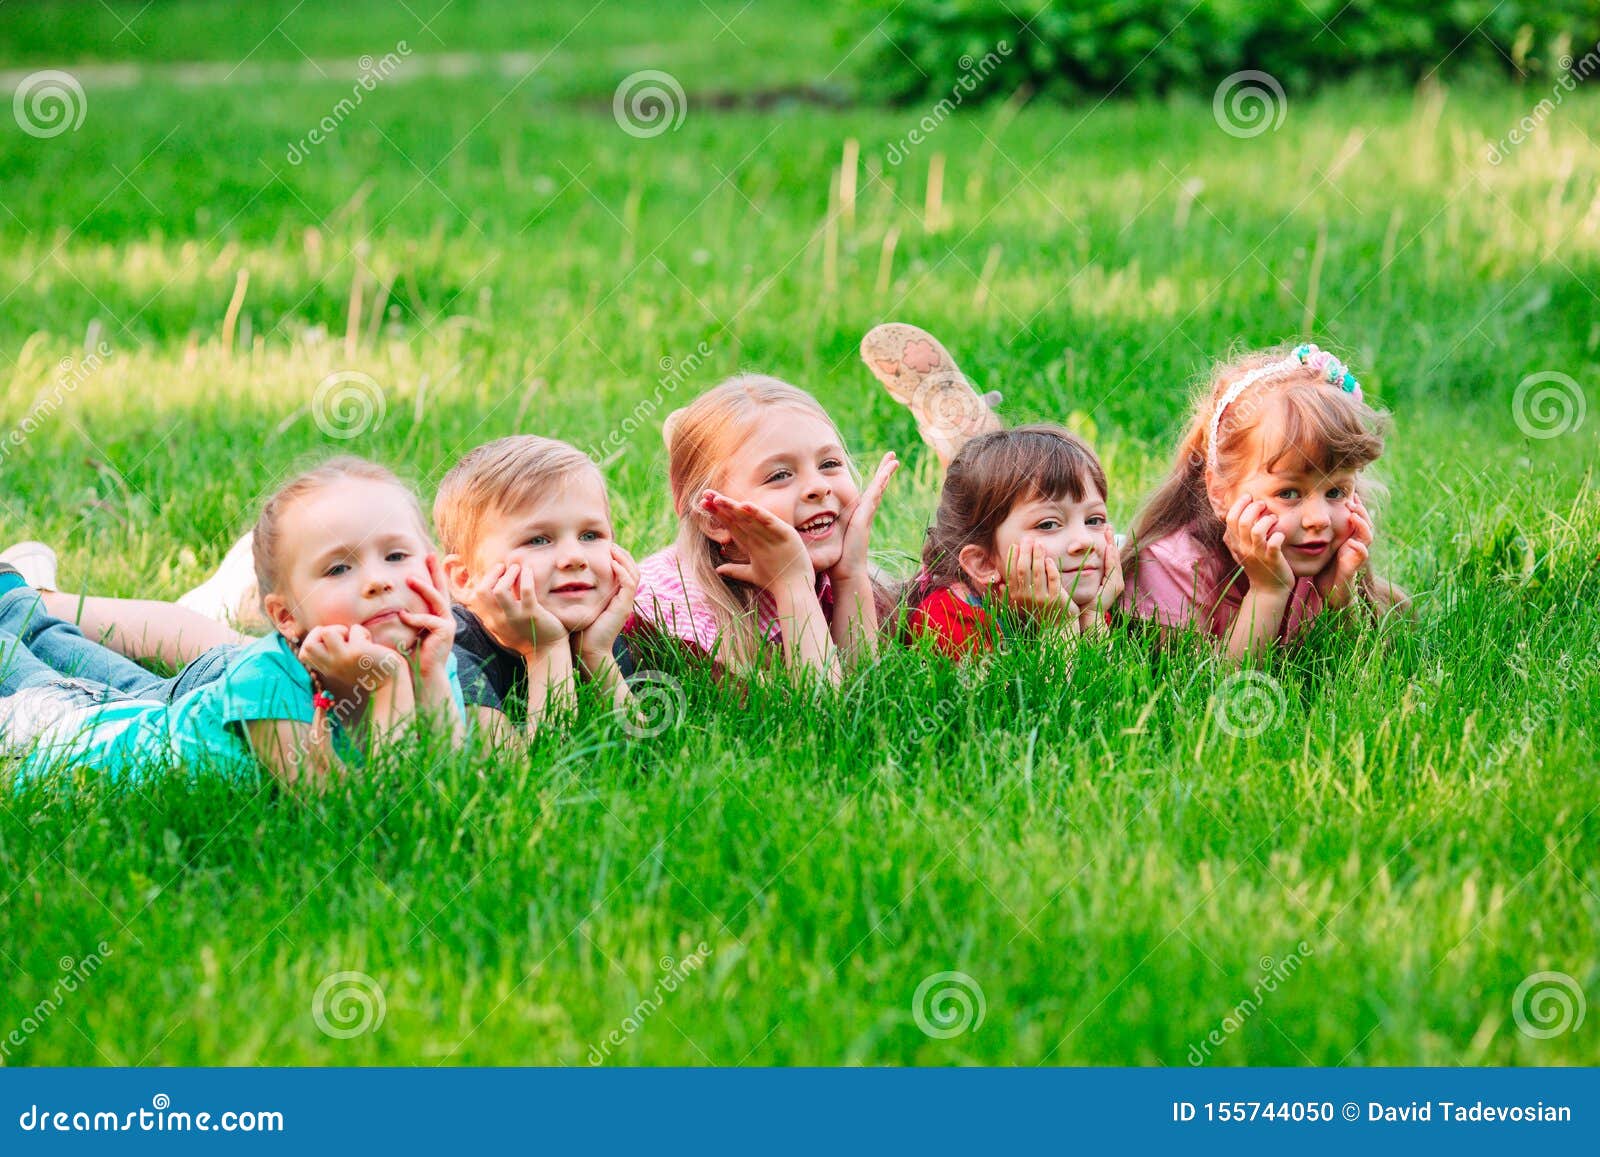 A Group of Children Lying on the Green Grass in the Park. the ...